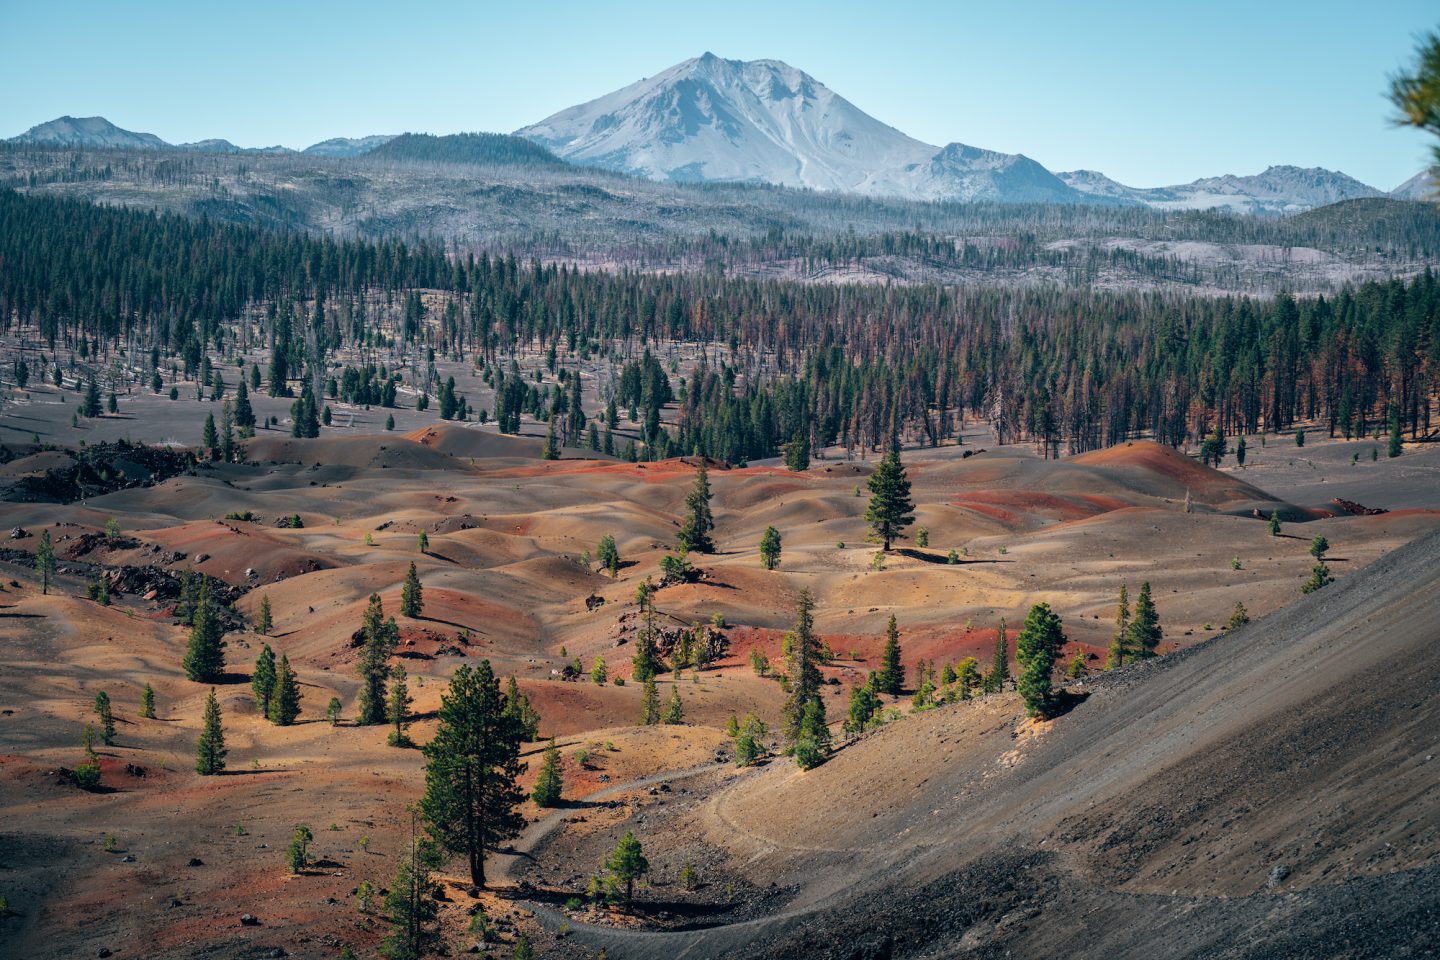 View of Painted Dunes and Lassen Peak from backside of Cinder Cone